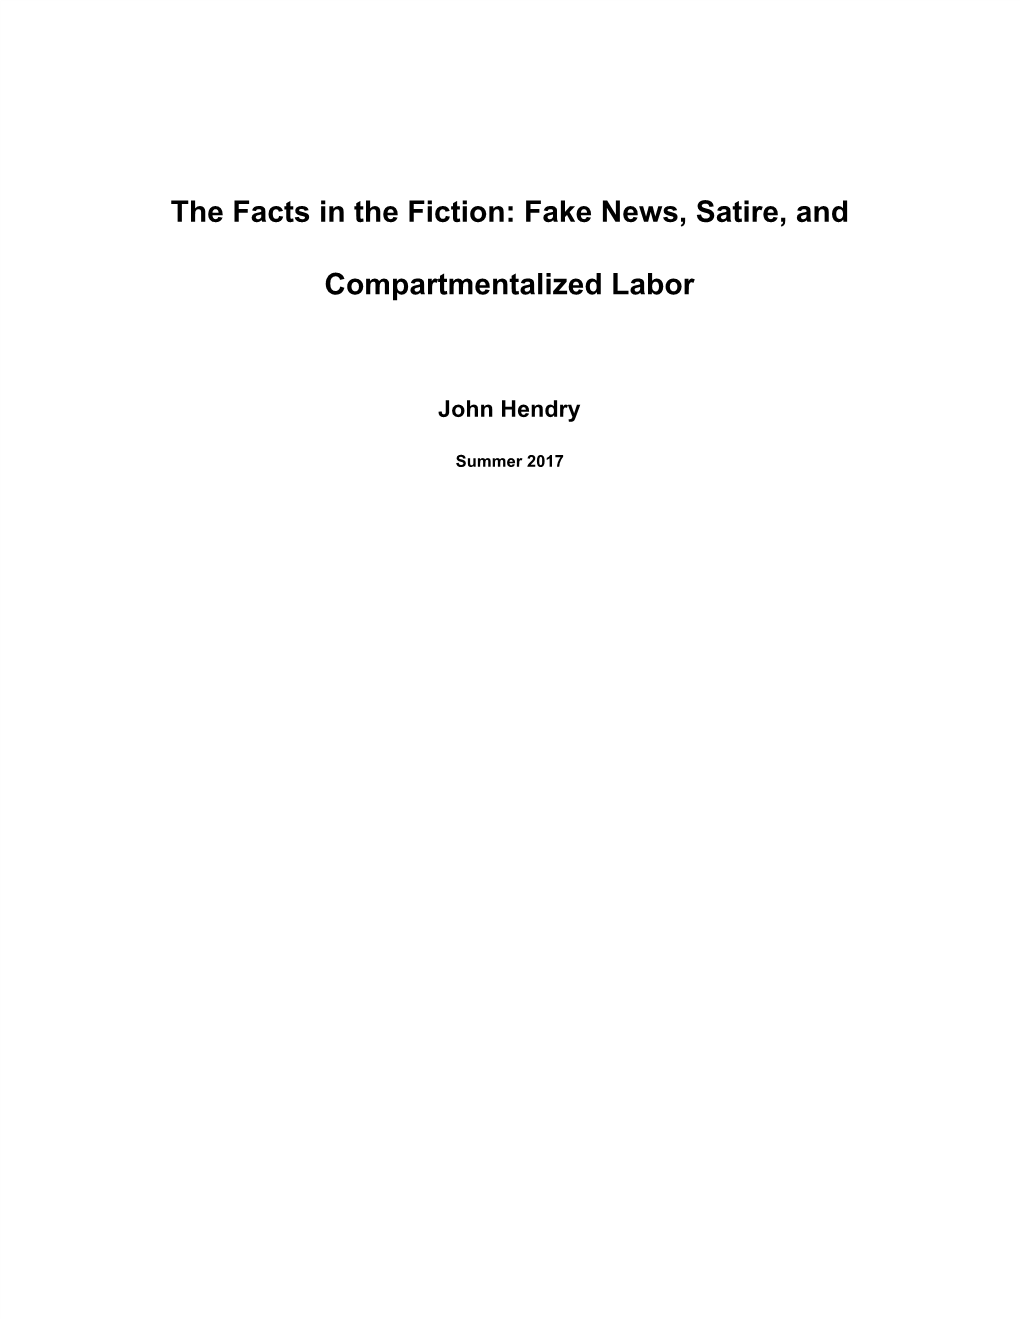 The Facts in the Fiction: Fake News, Satire, and Compartmentalized Labor